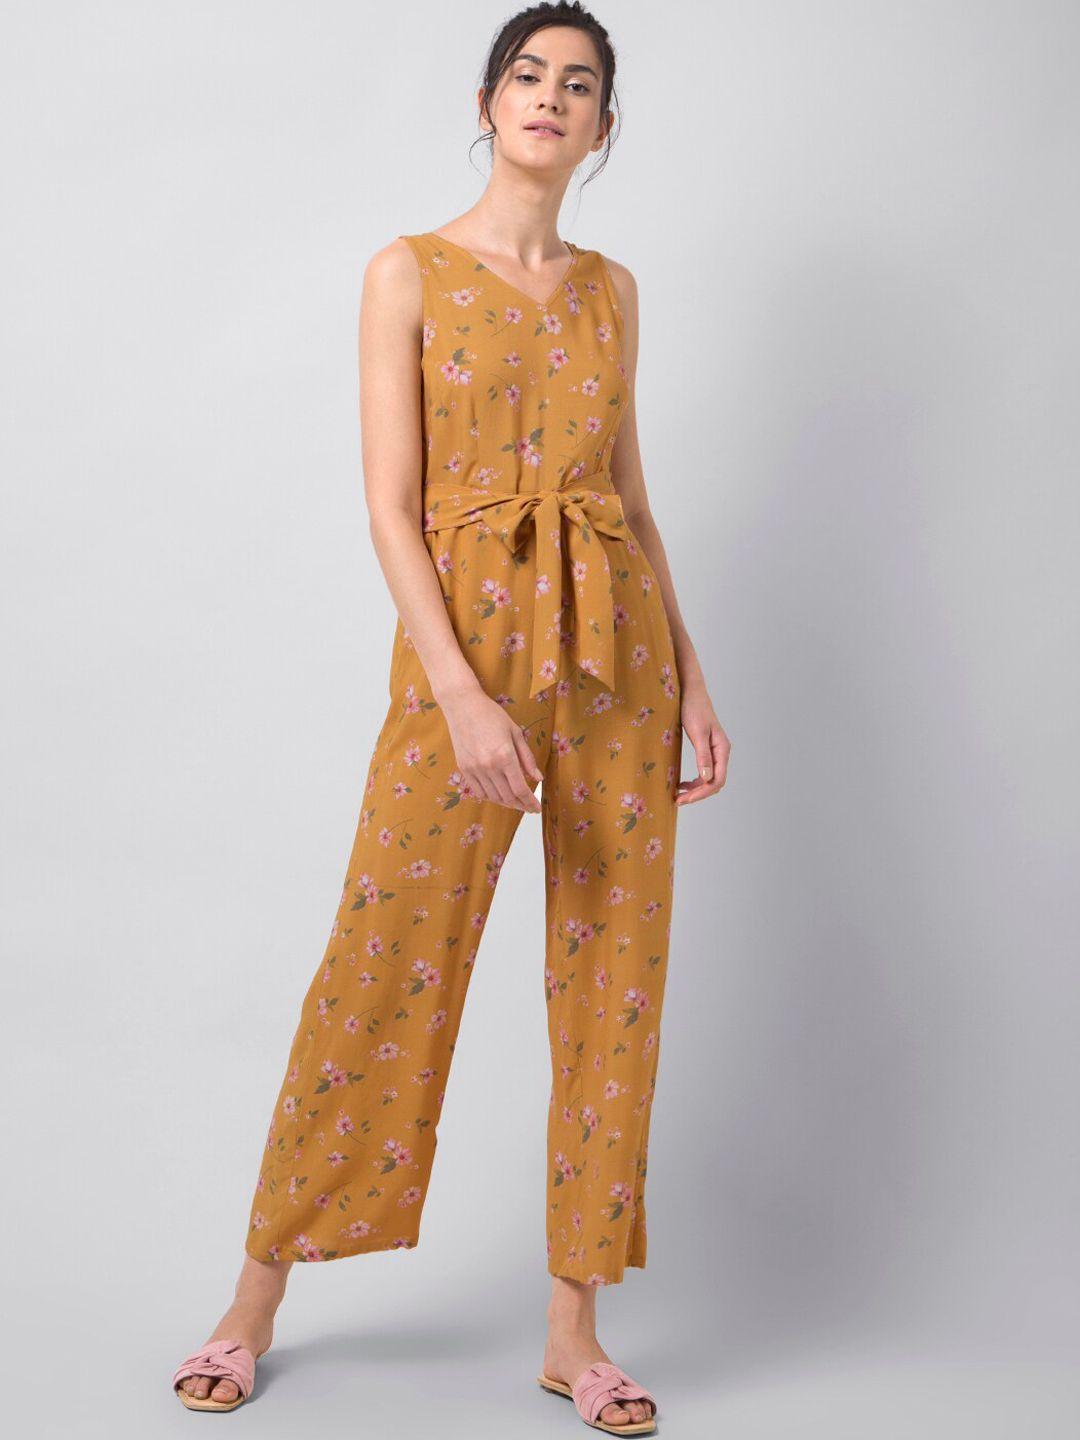 faballey women mustard yellow & pink floral printed basic jumpsuit